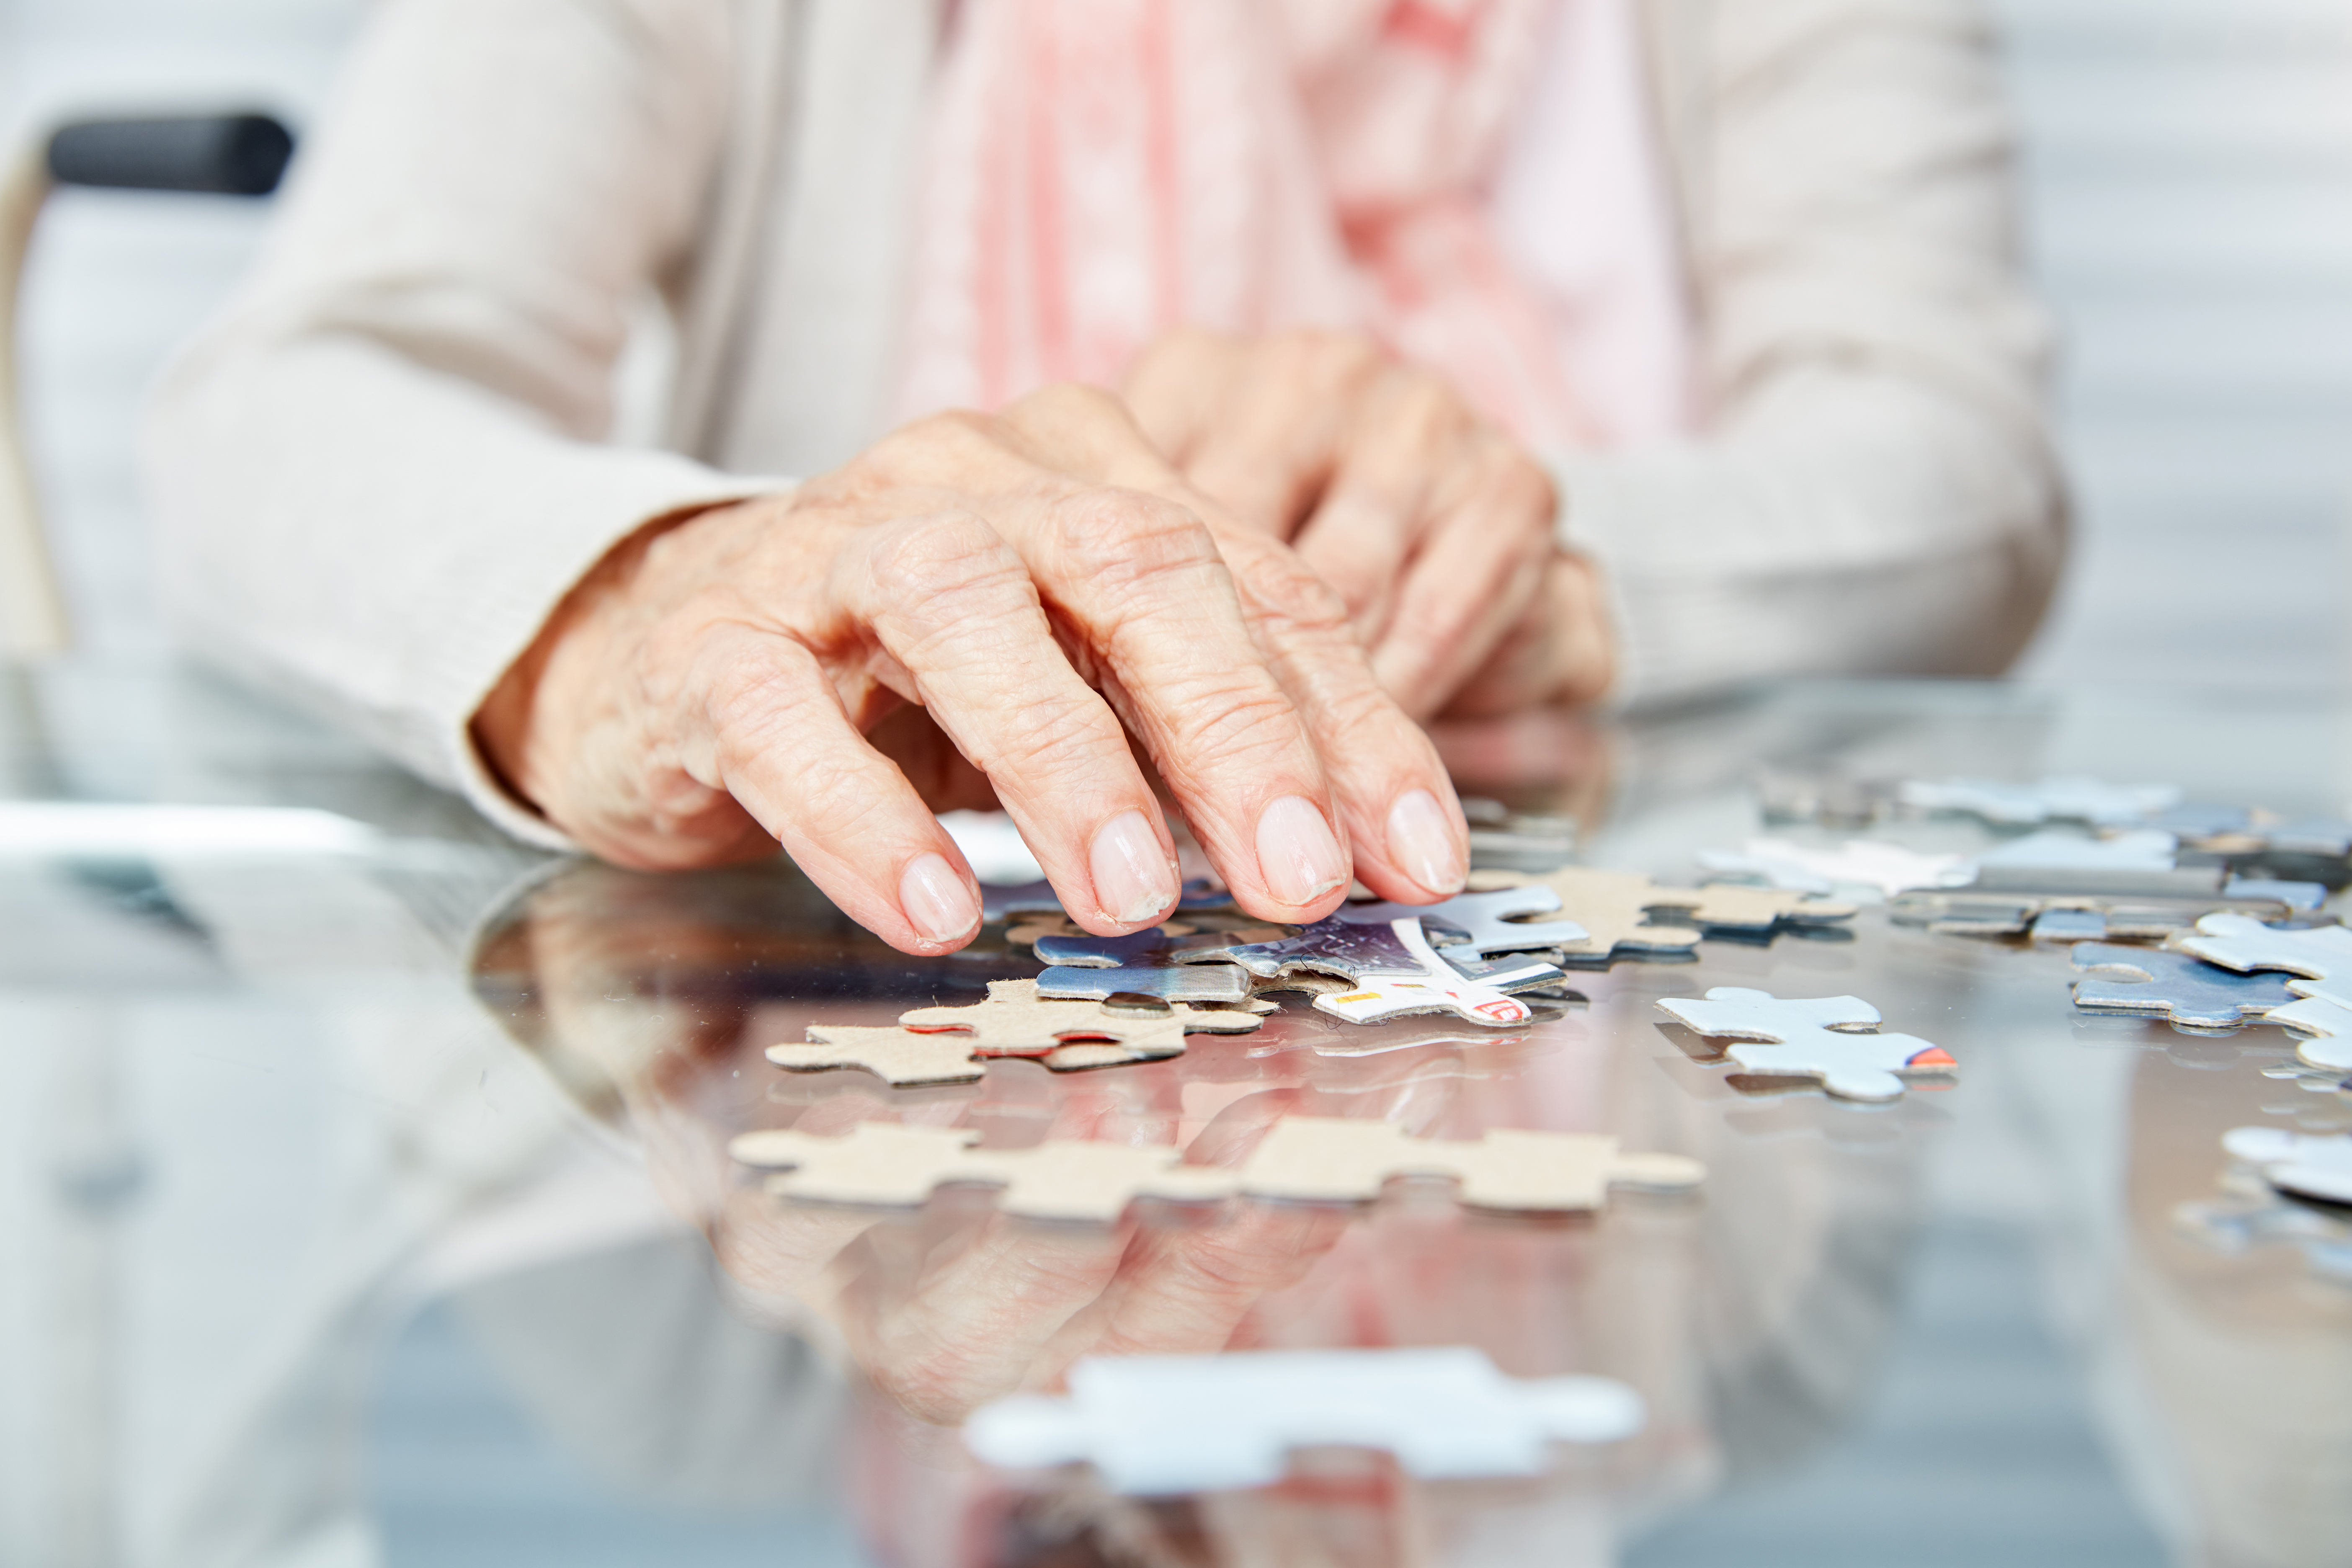 An older person sits completing a puzzle